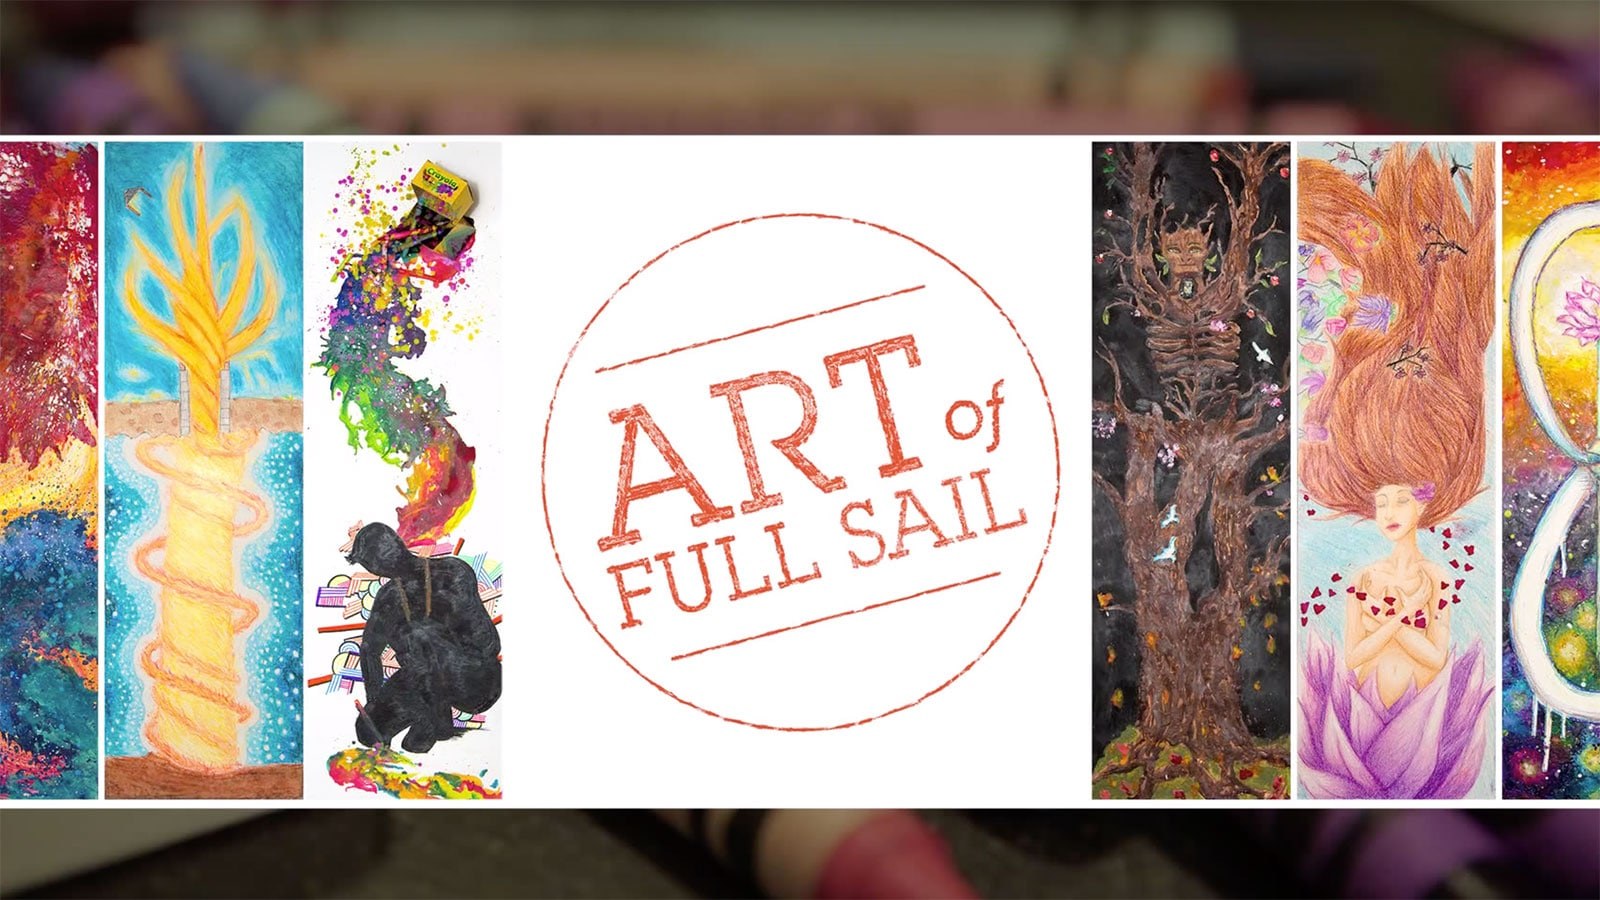 Students Use Crayola Crayons on New Full Sail Art Project [Video] - Hero image 